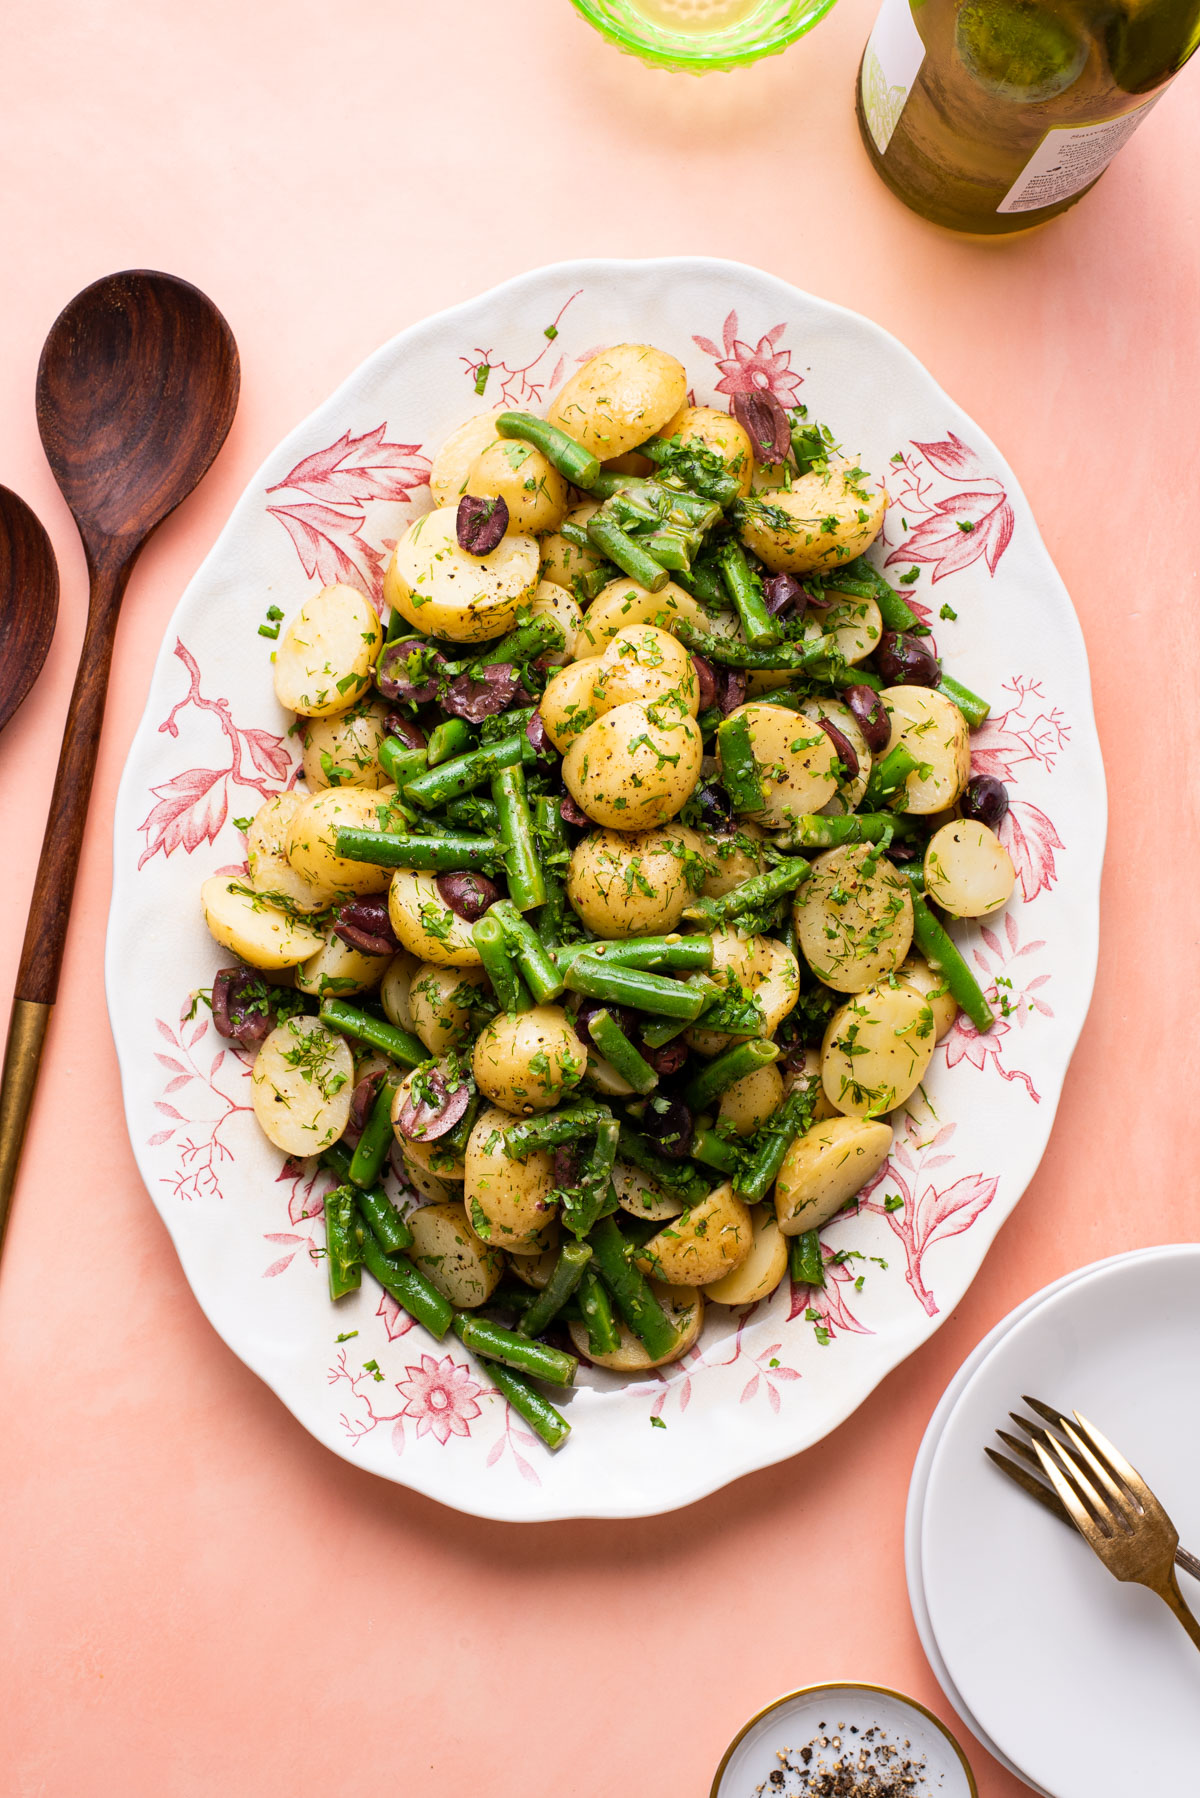 Mayo-less vegan potato salad with olives and green beans on a vintage floral platter.